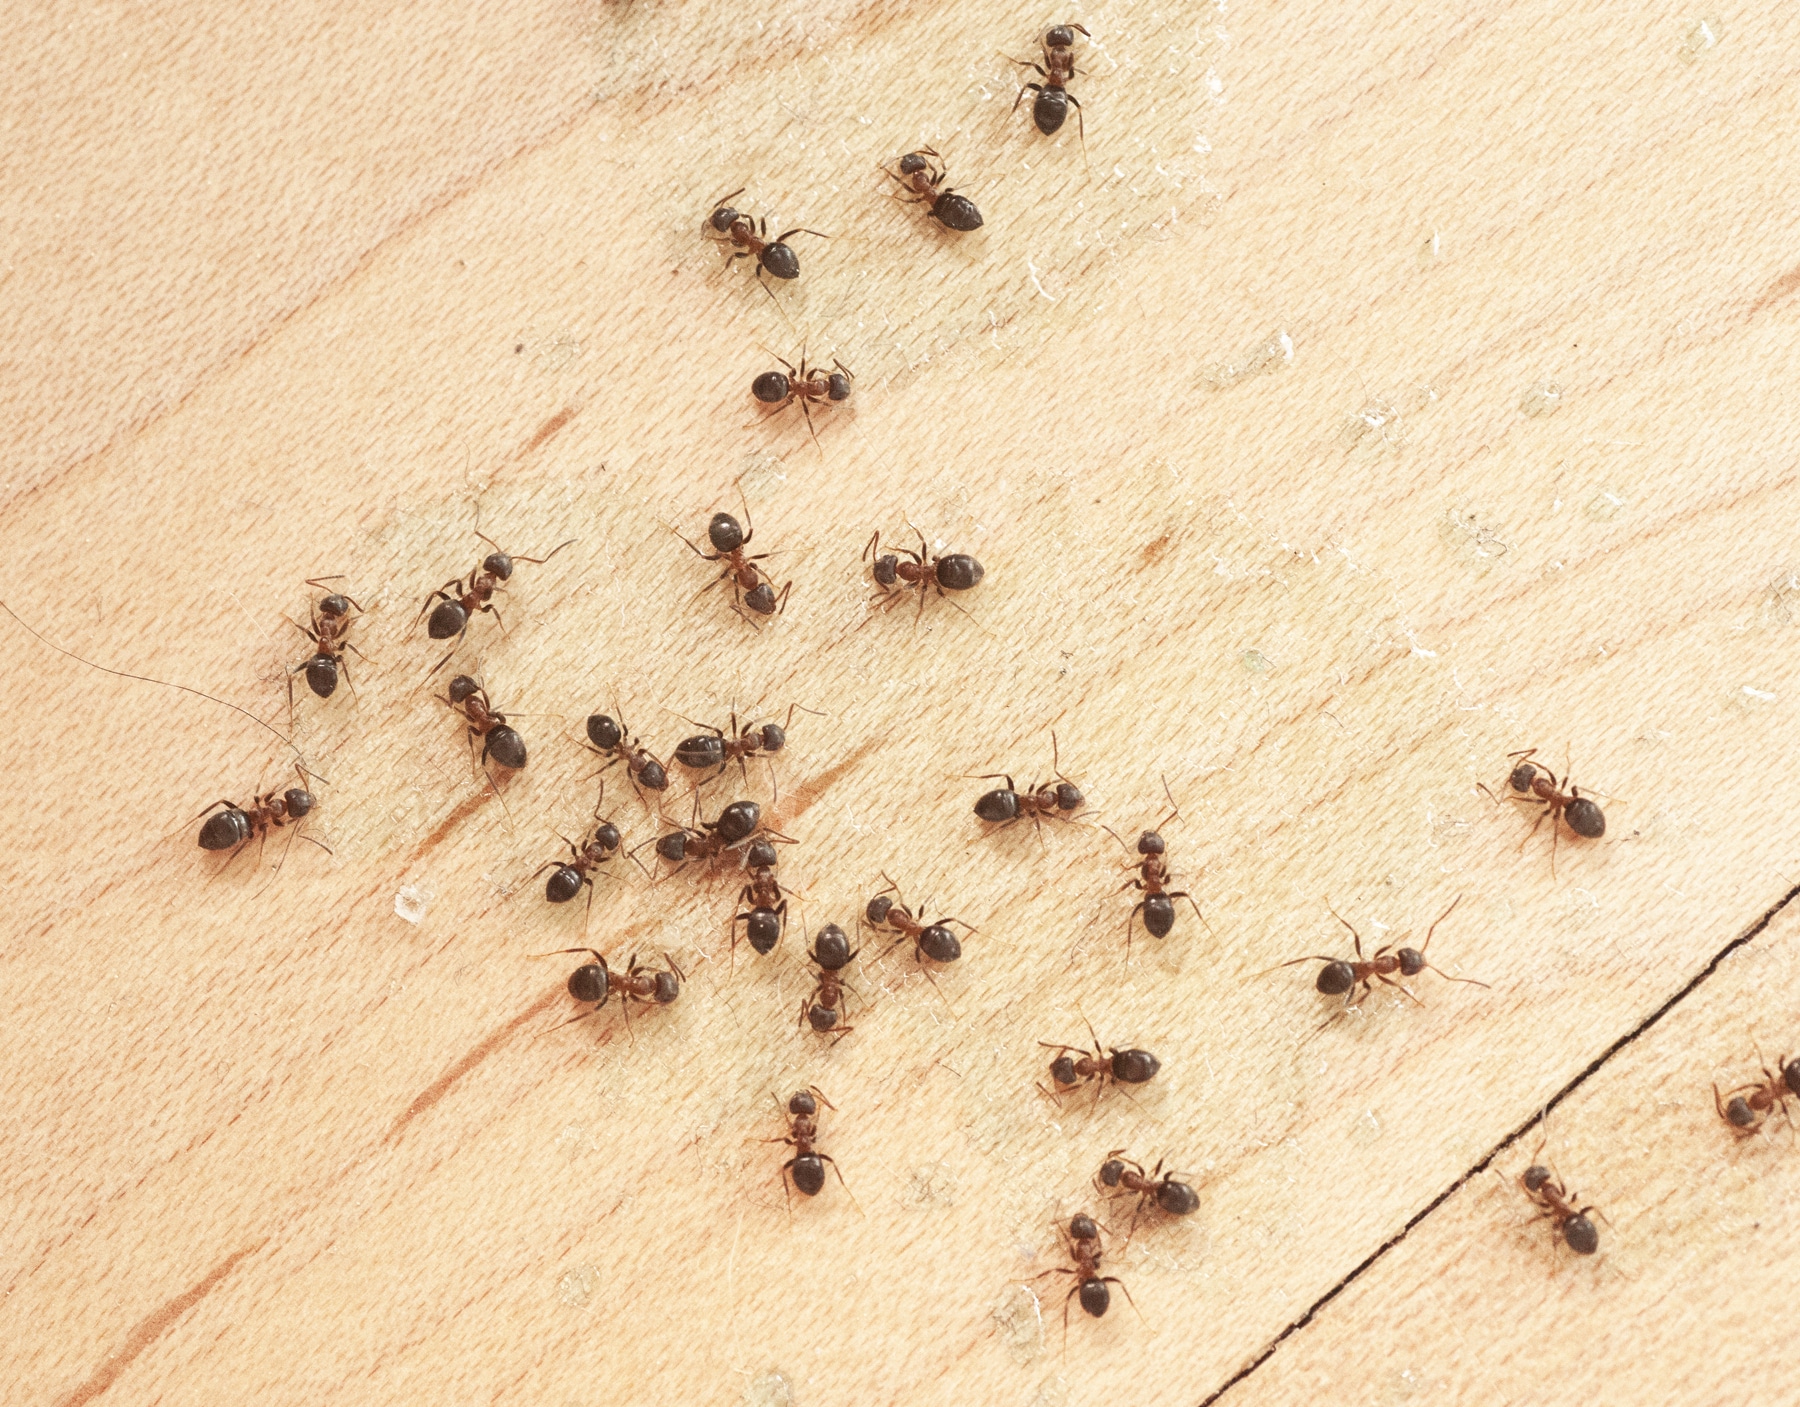 ant-removal-service-lakeland-mn